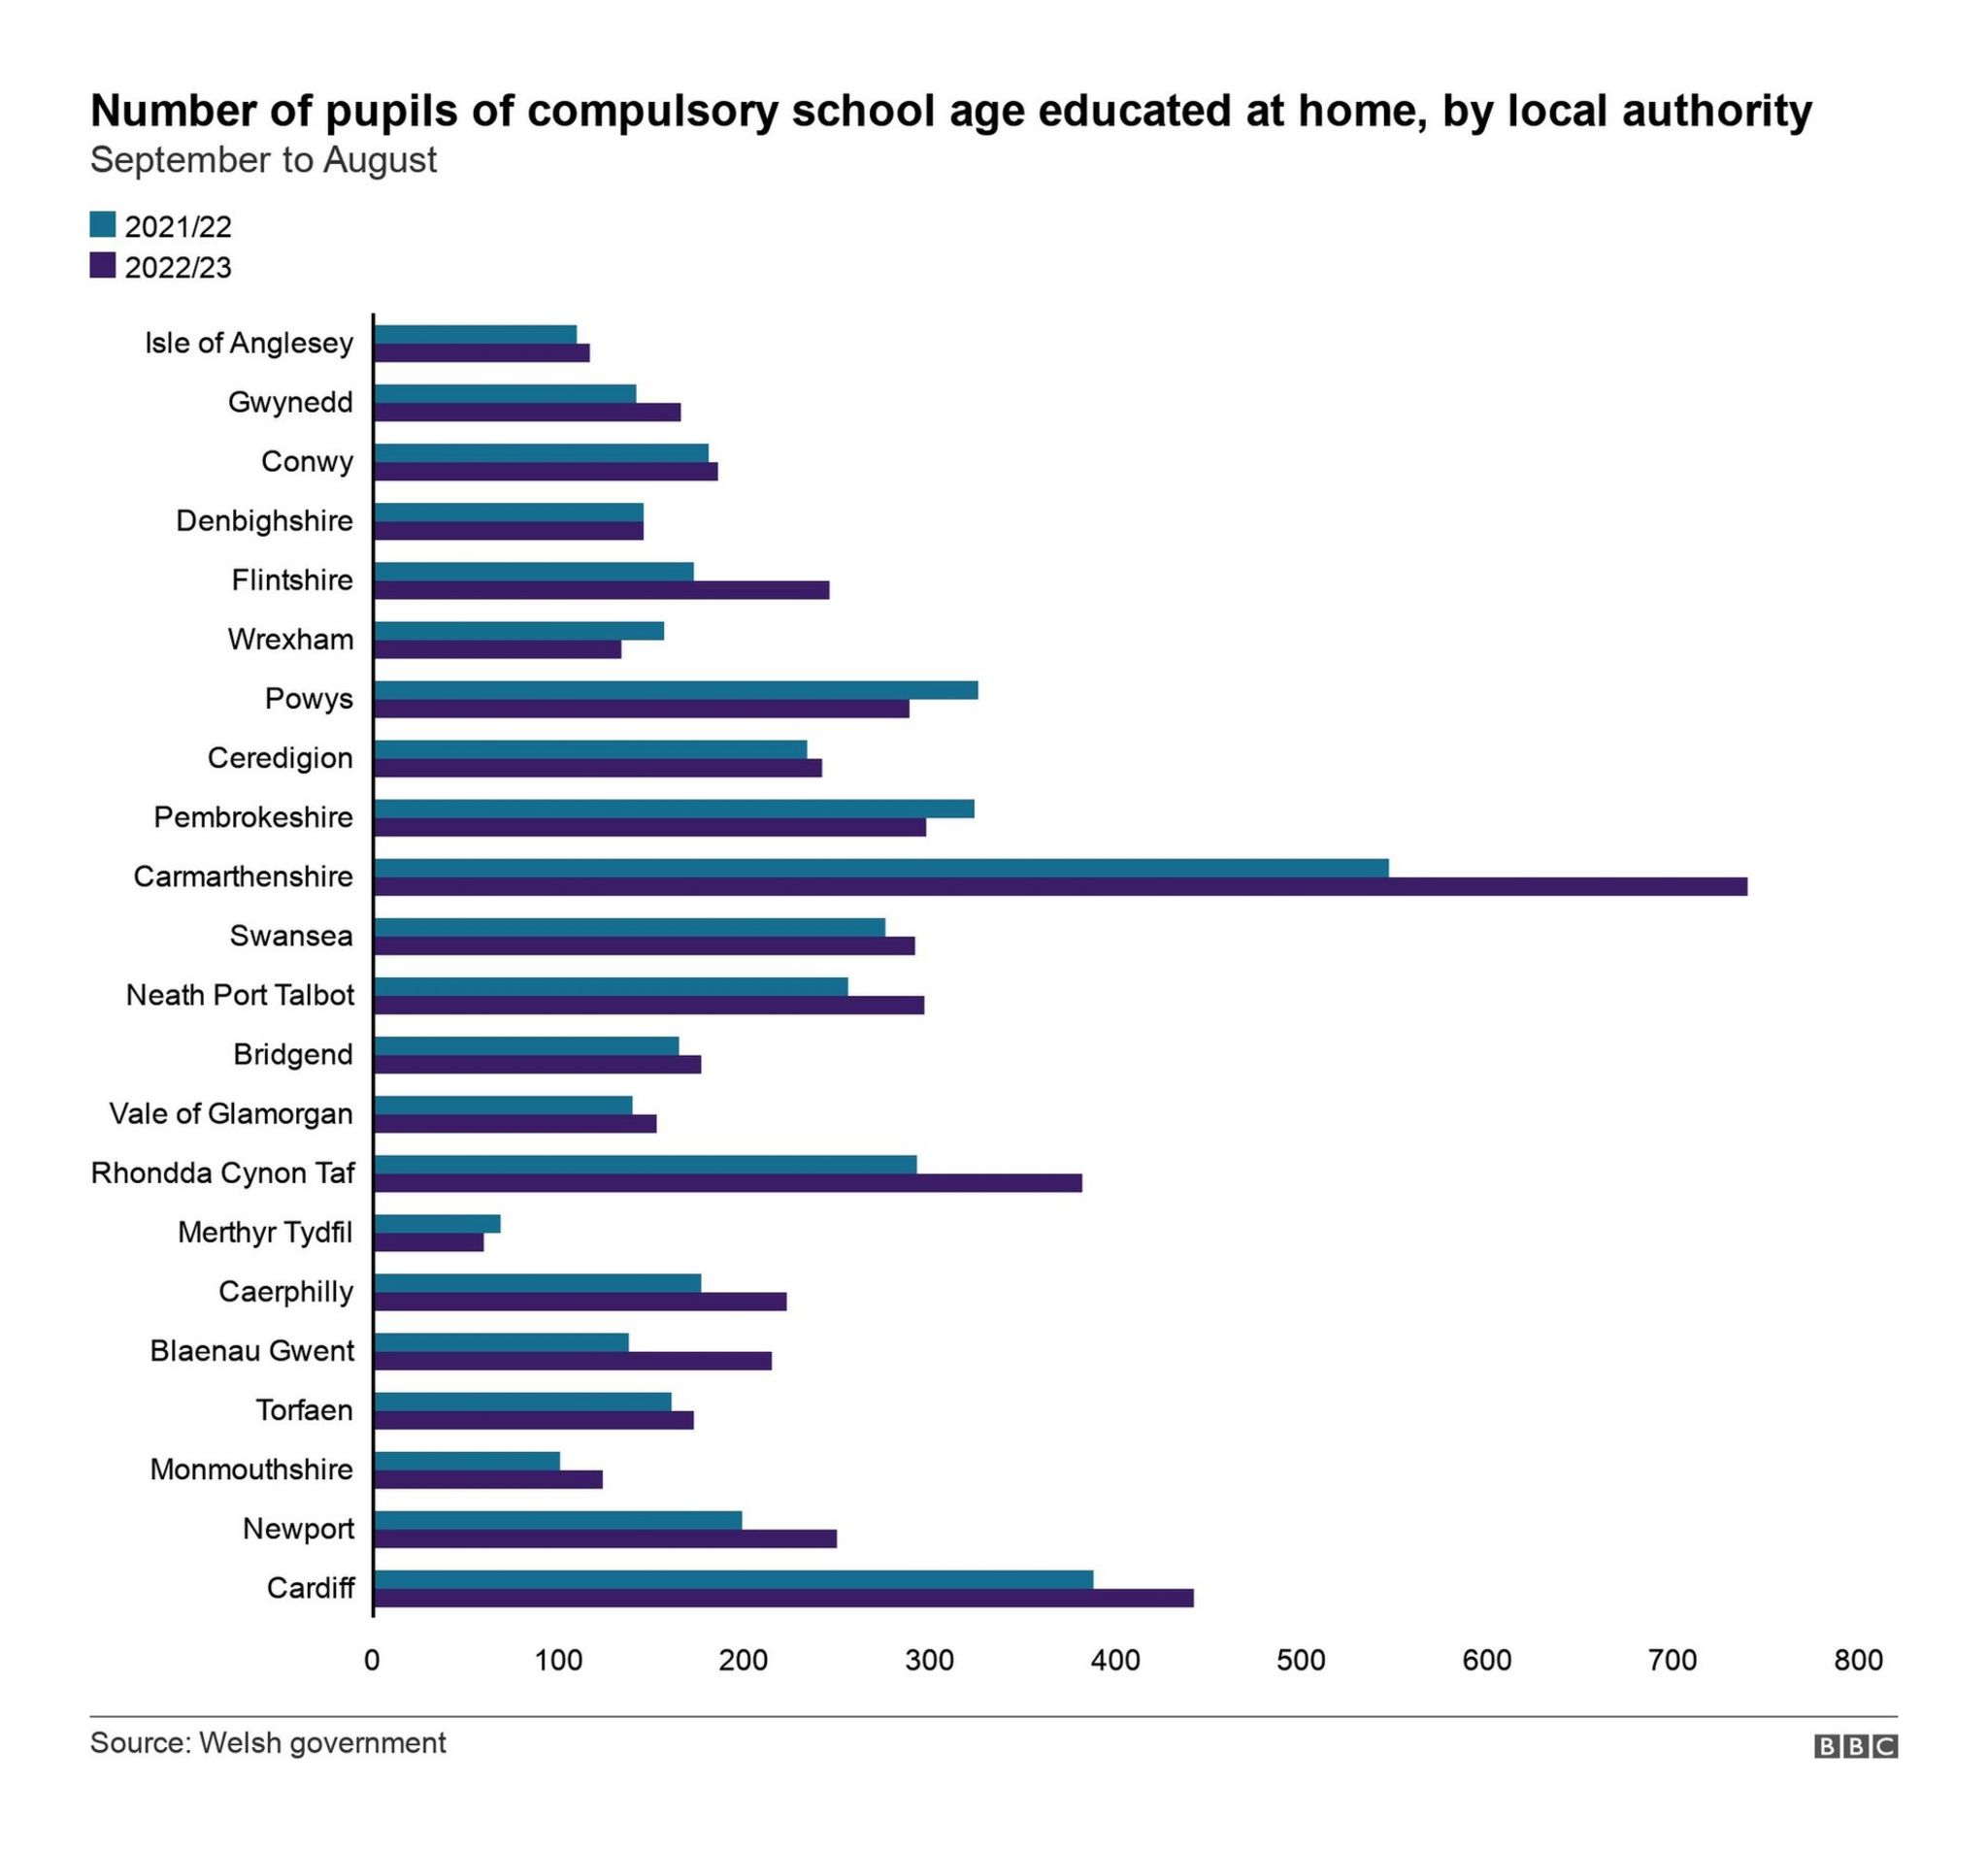 Graph showing the number of pupils of compulsory school age educated at home by local authority over the last two years